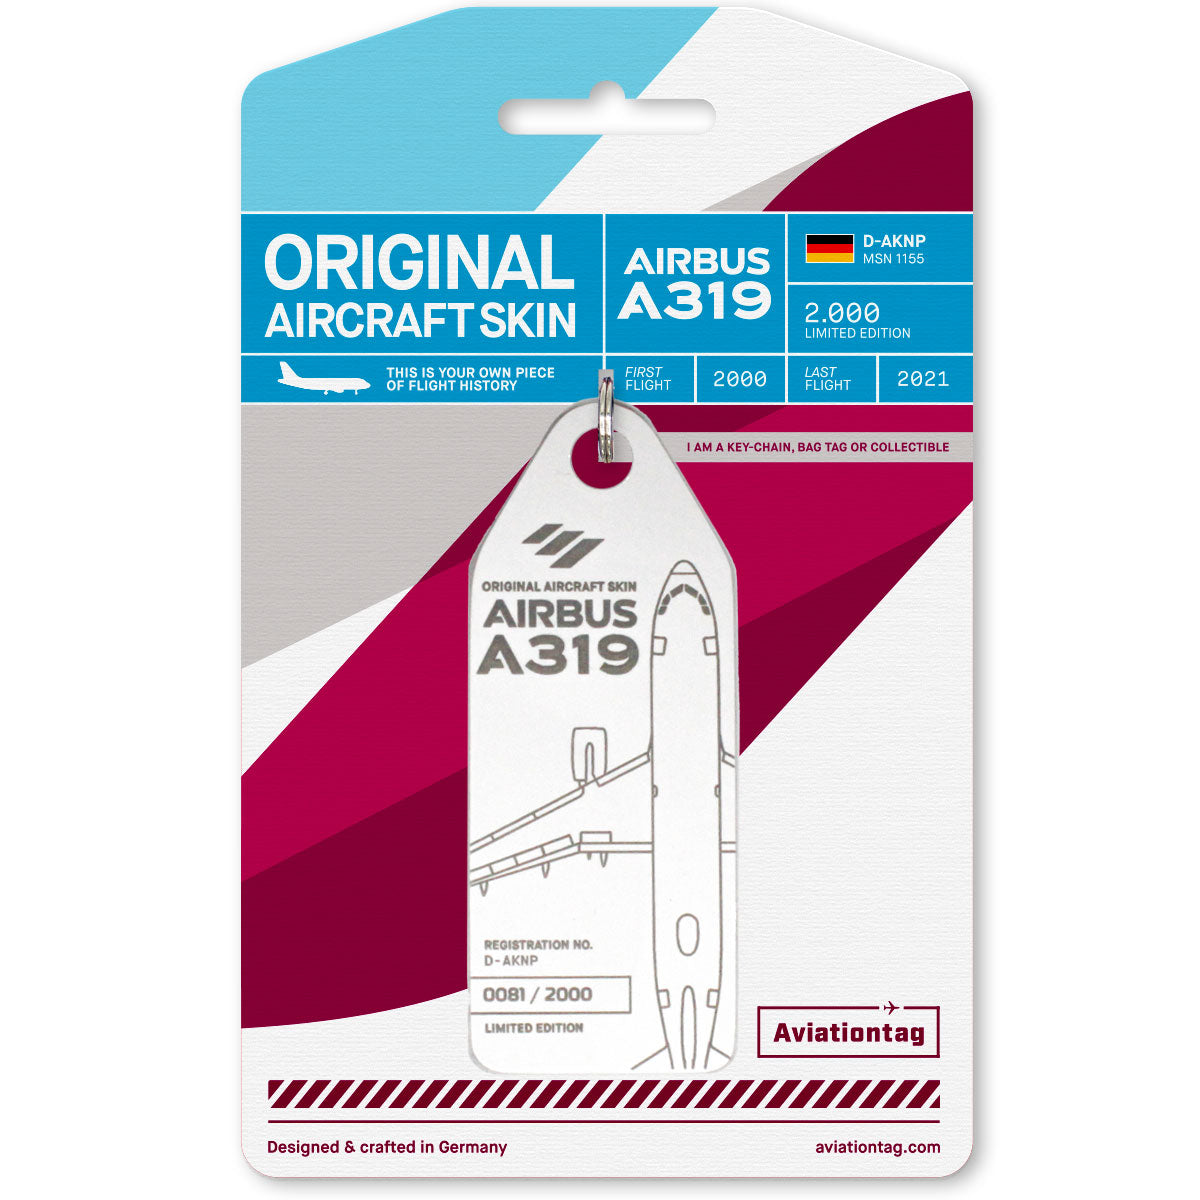 Airbus A319 - D-AKNP - Aviationtag